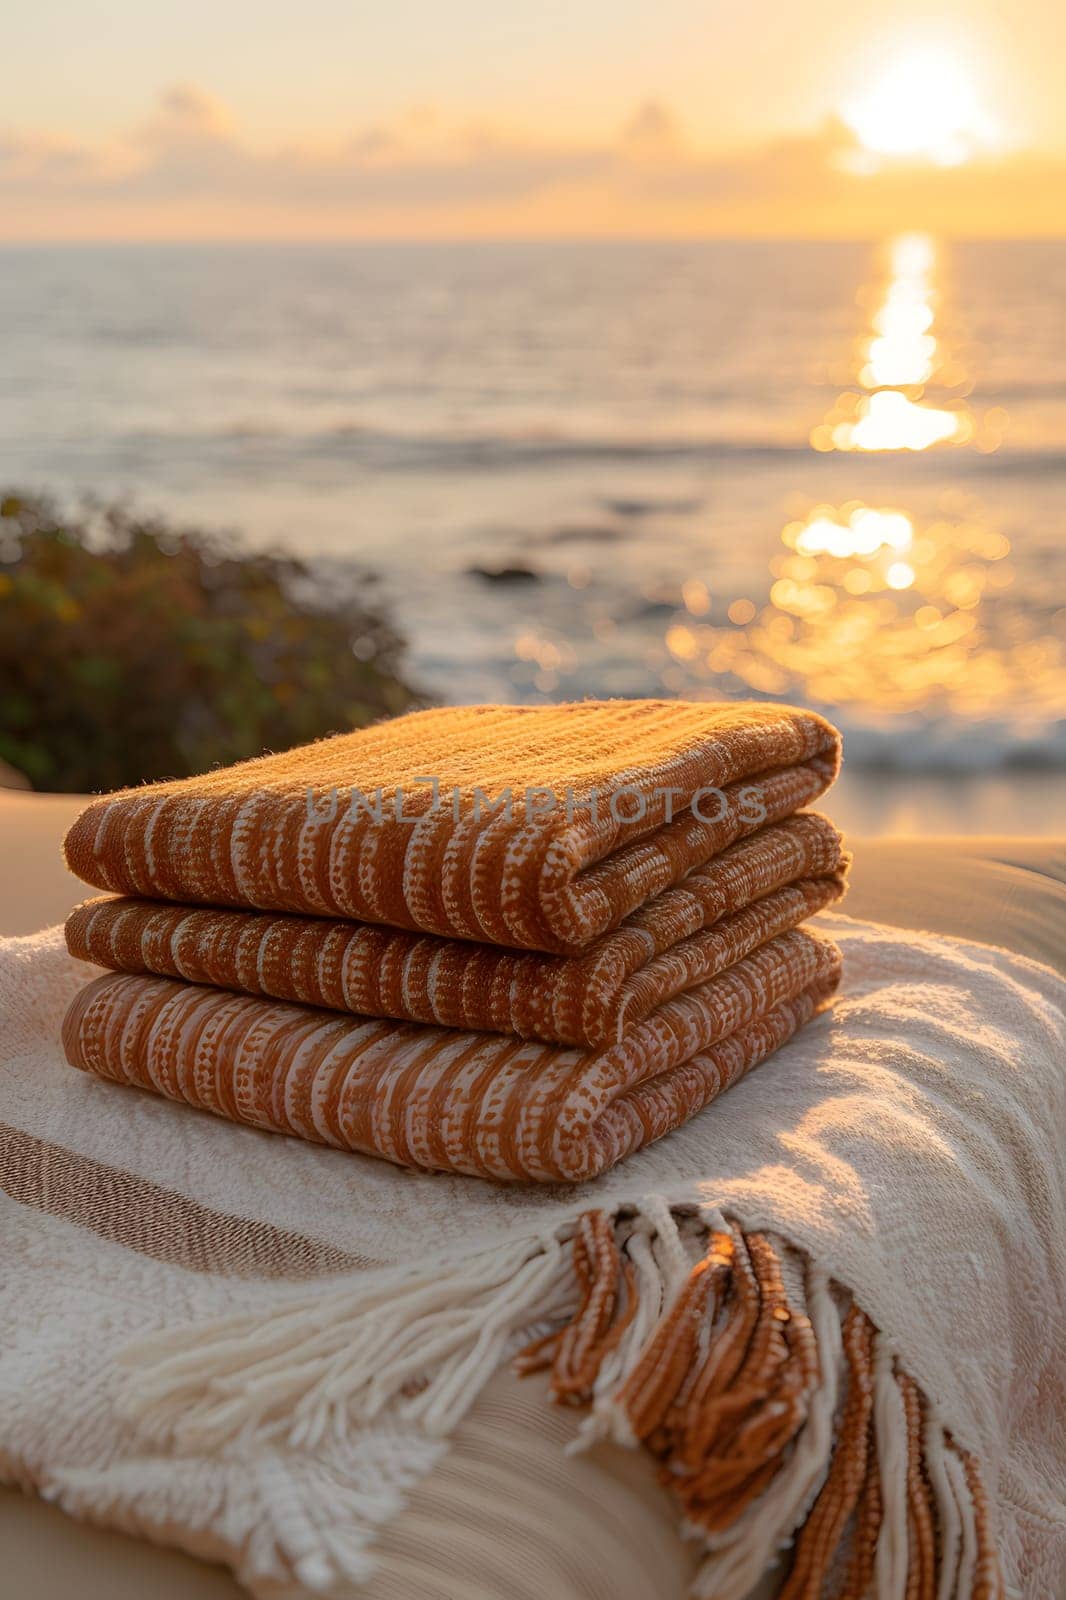 A stack of towels resembling fluffy clouds on a beach at sunset, creating a picturesque landscape against the horizon with the sky painted in warm hues